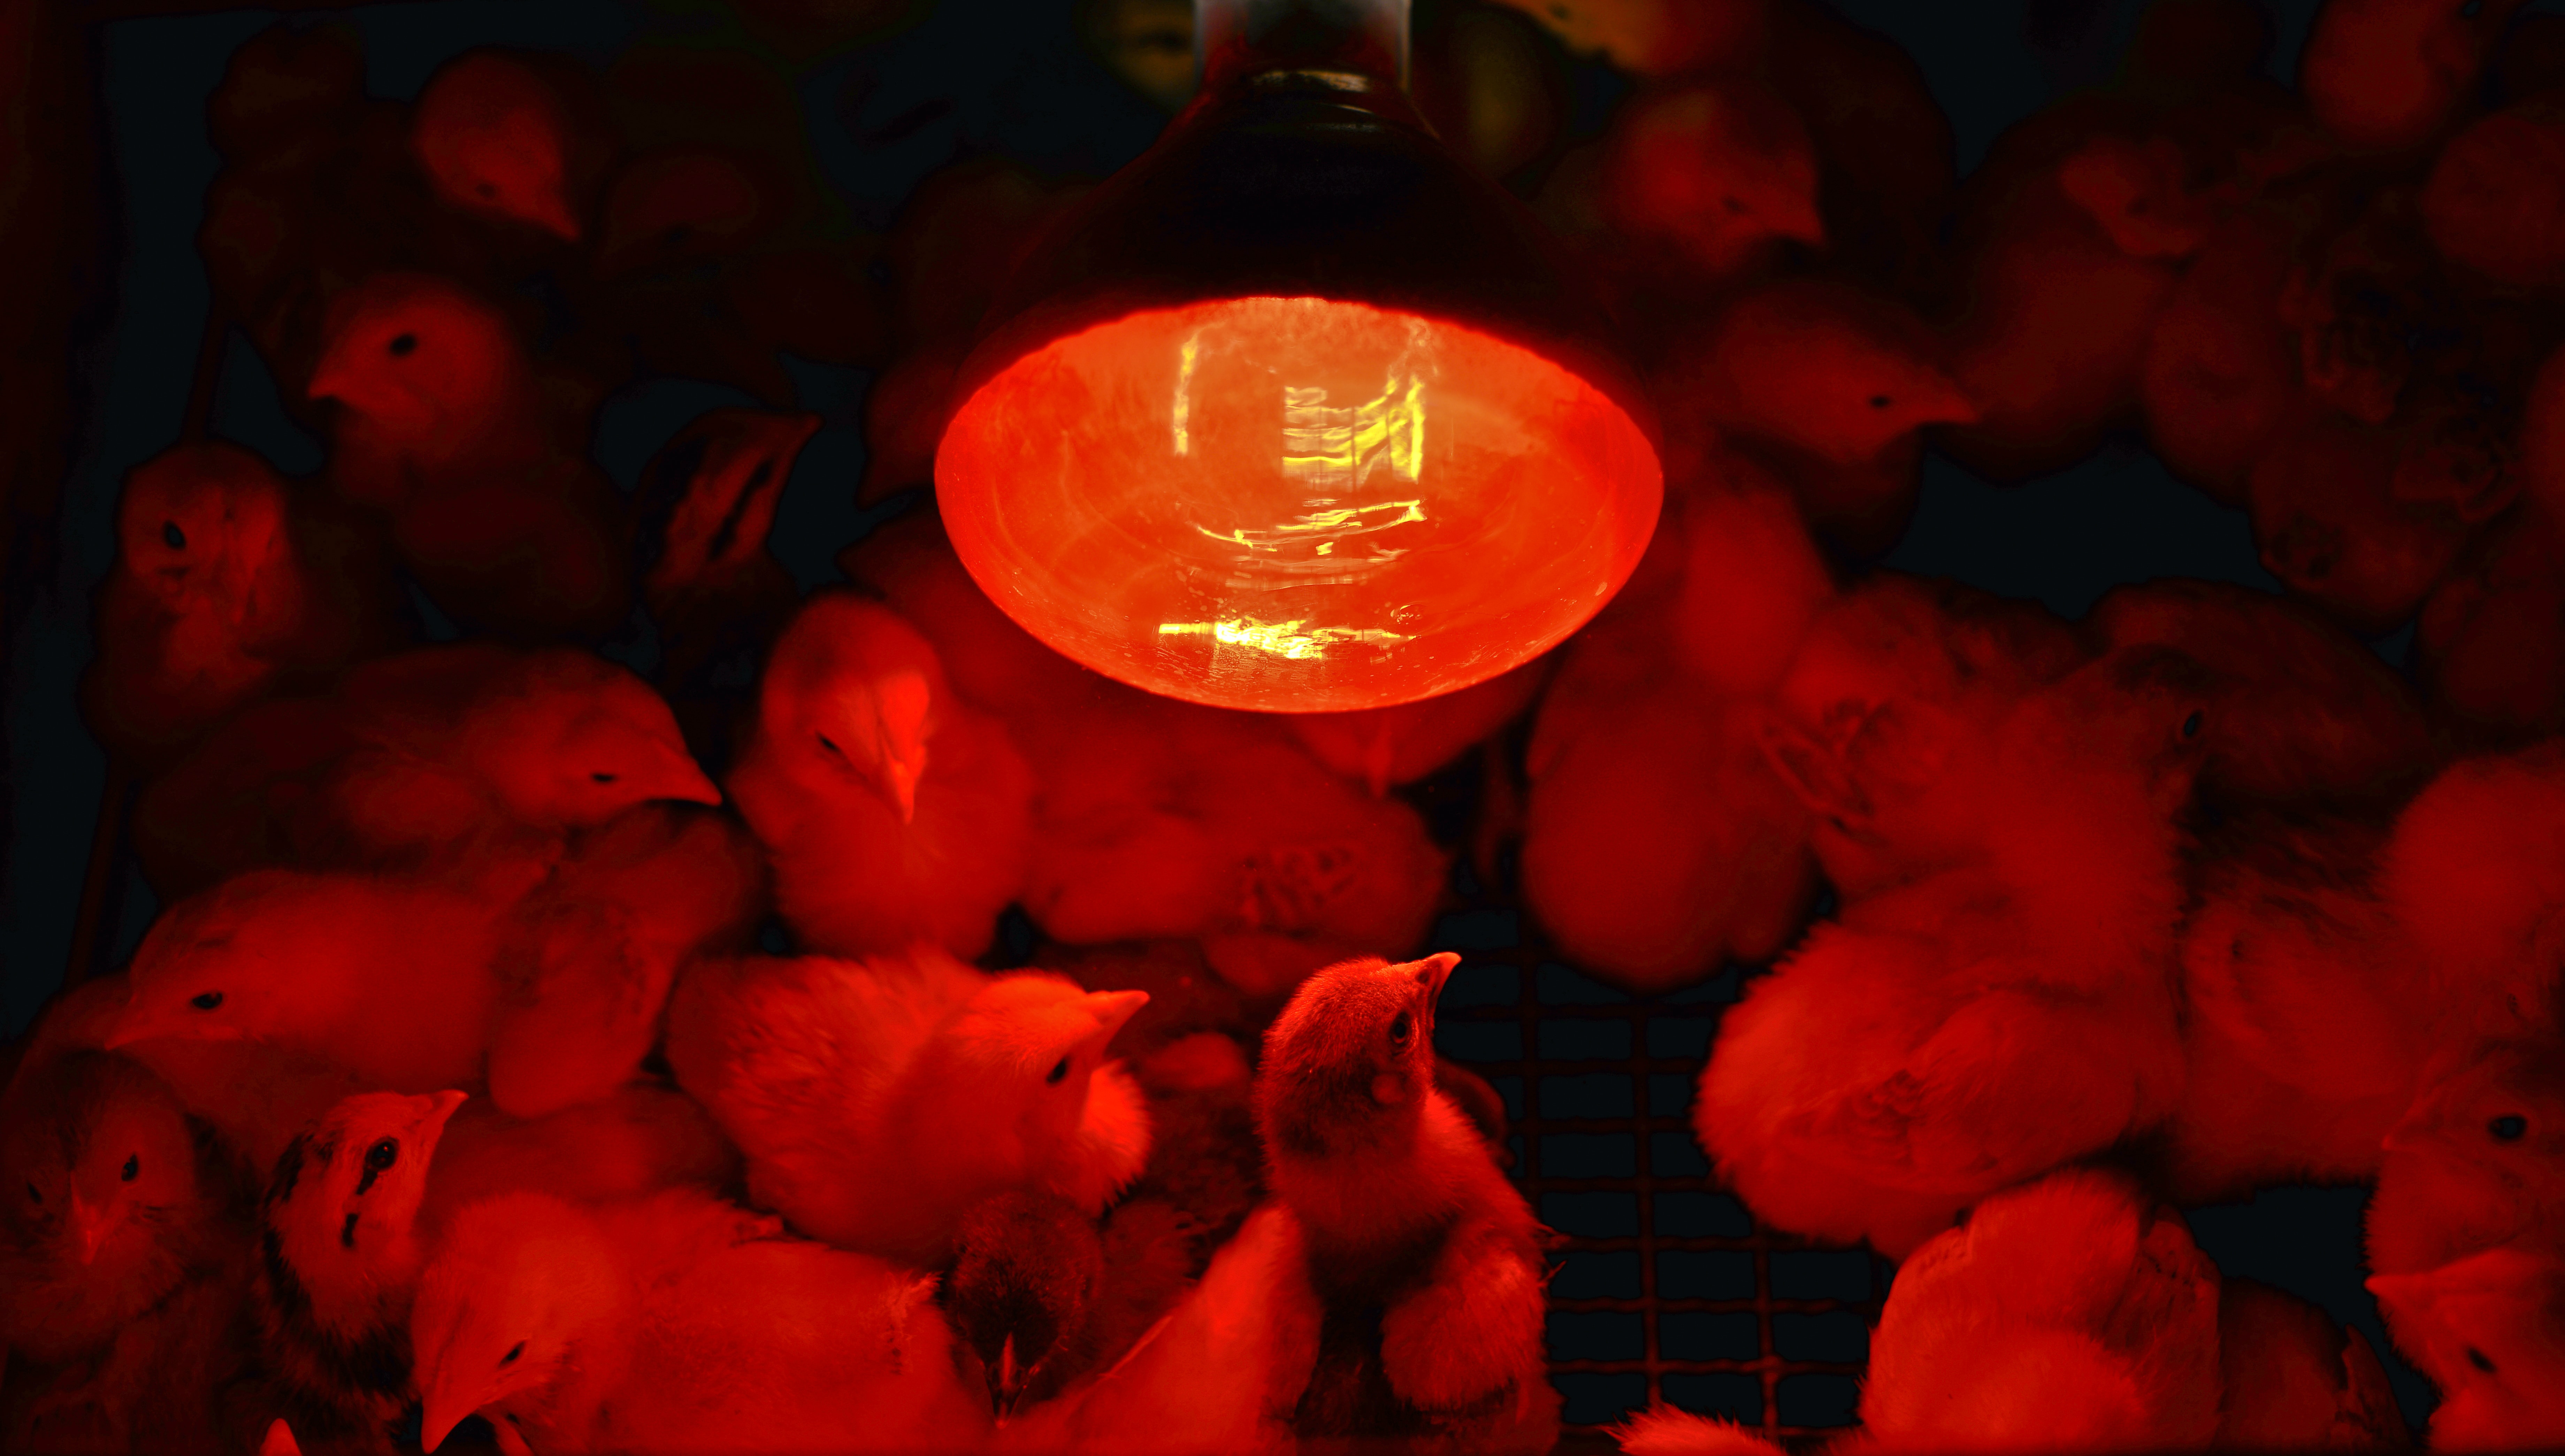 What is a heat lamp and what does it do for chickens?